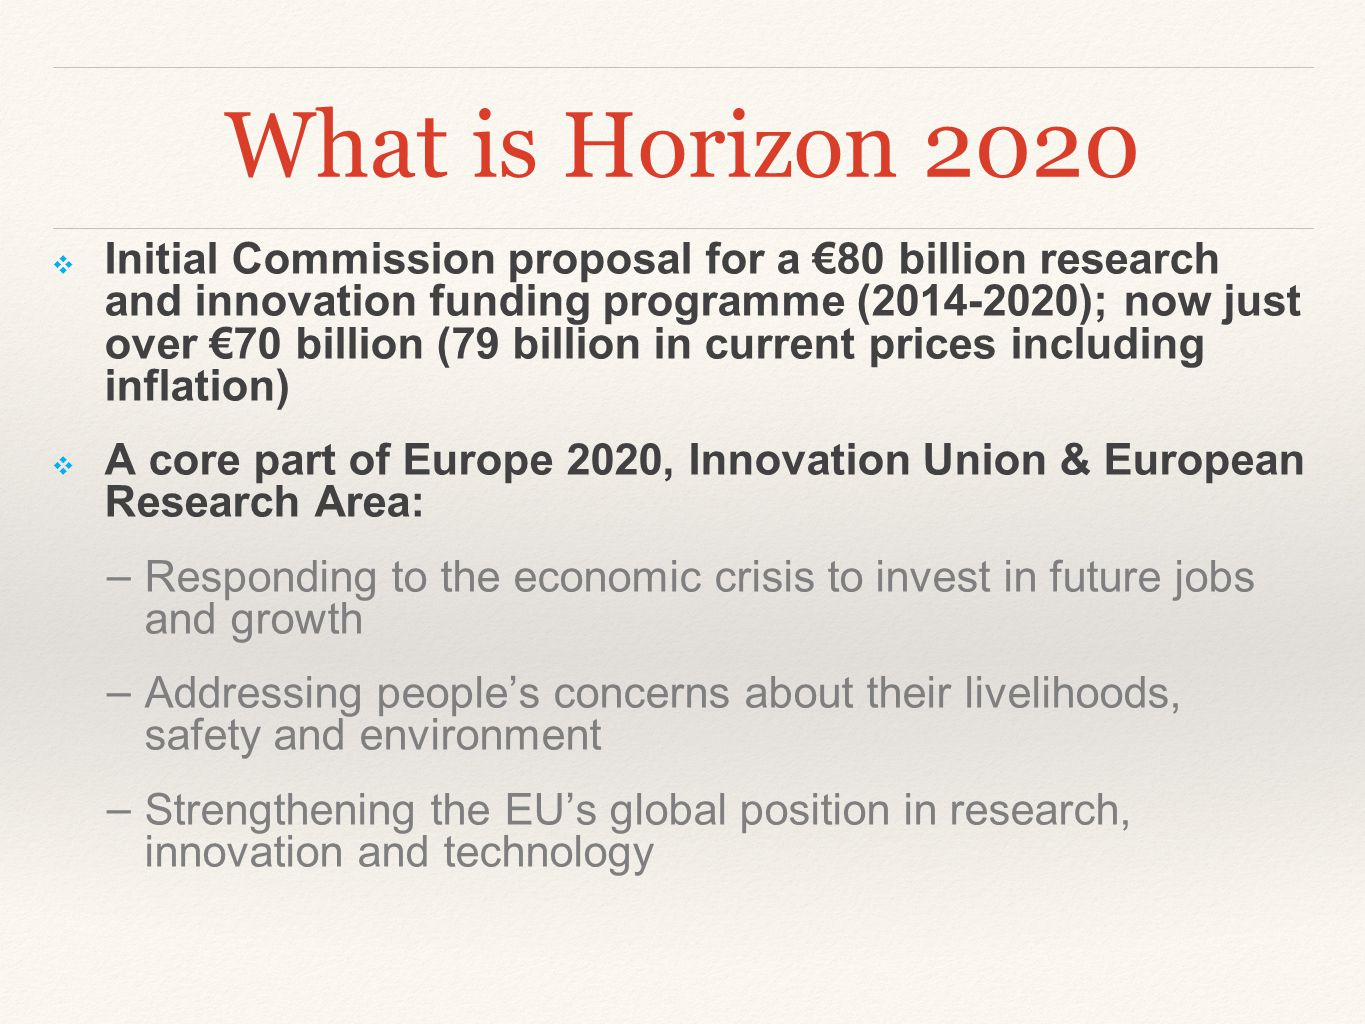 What is Horizon 2020 ❖ Initial Commission proposal for a €80 billion research and innovation funding programme ( ); now just over €70 billion (79 billion in current prices including inflation) ❖ A core part of Europe 2020, Innovation Union & European Research Area: − Responding to the economic crisis to invest in future jobs and growth − Addressing people’s concerns about their livelihoods, safety and environment − Strengthening the EU’s global position in research, innovation and technology